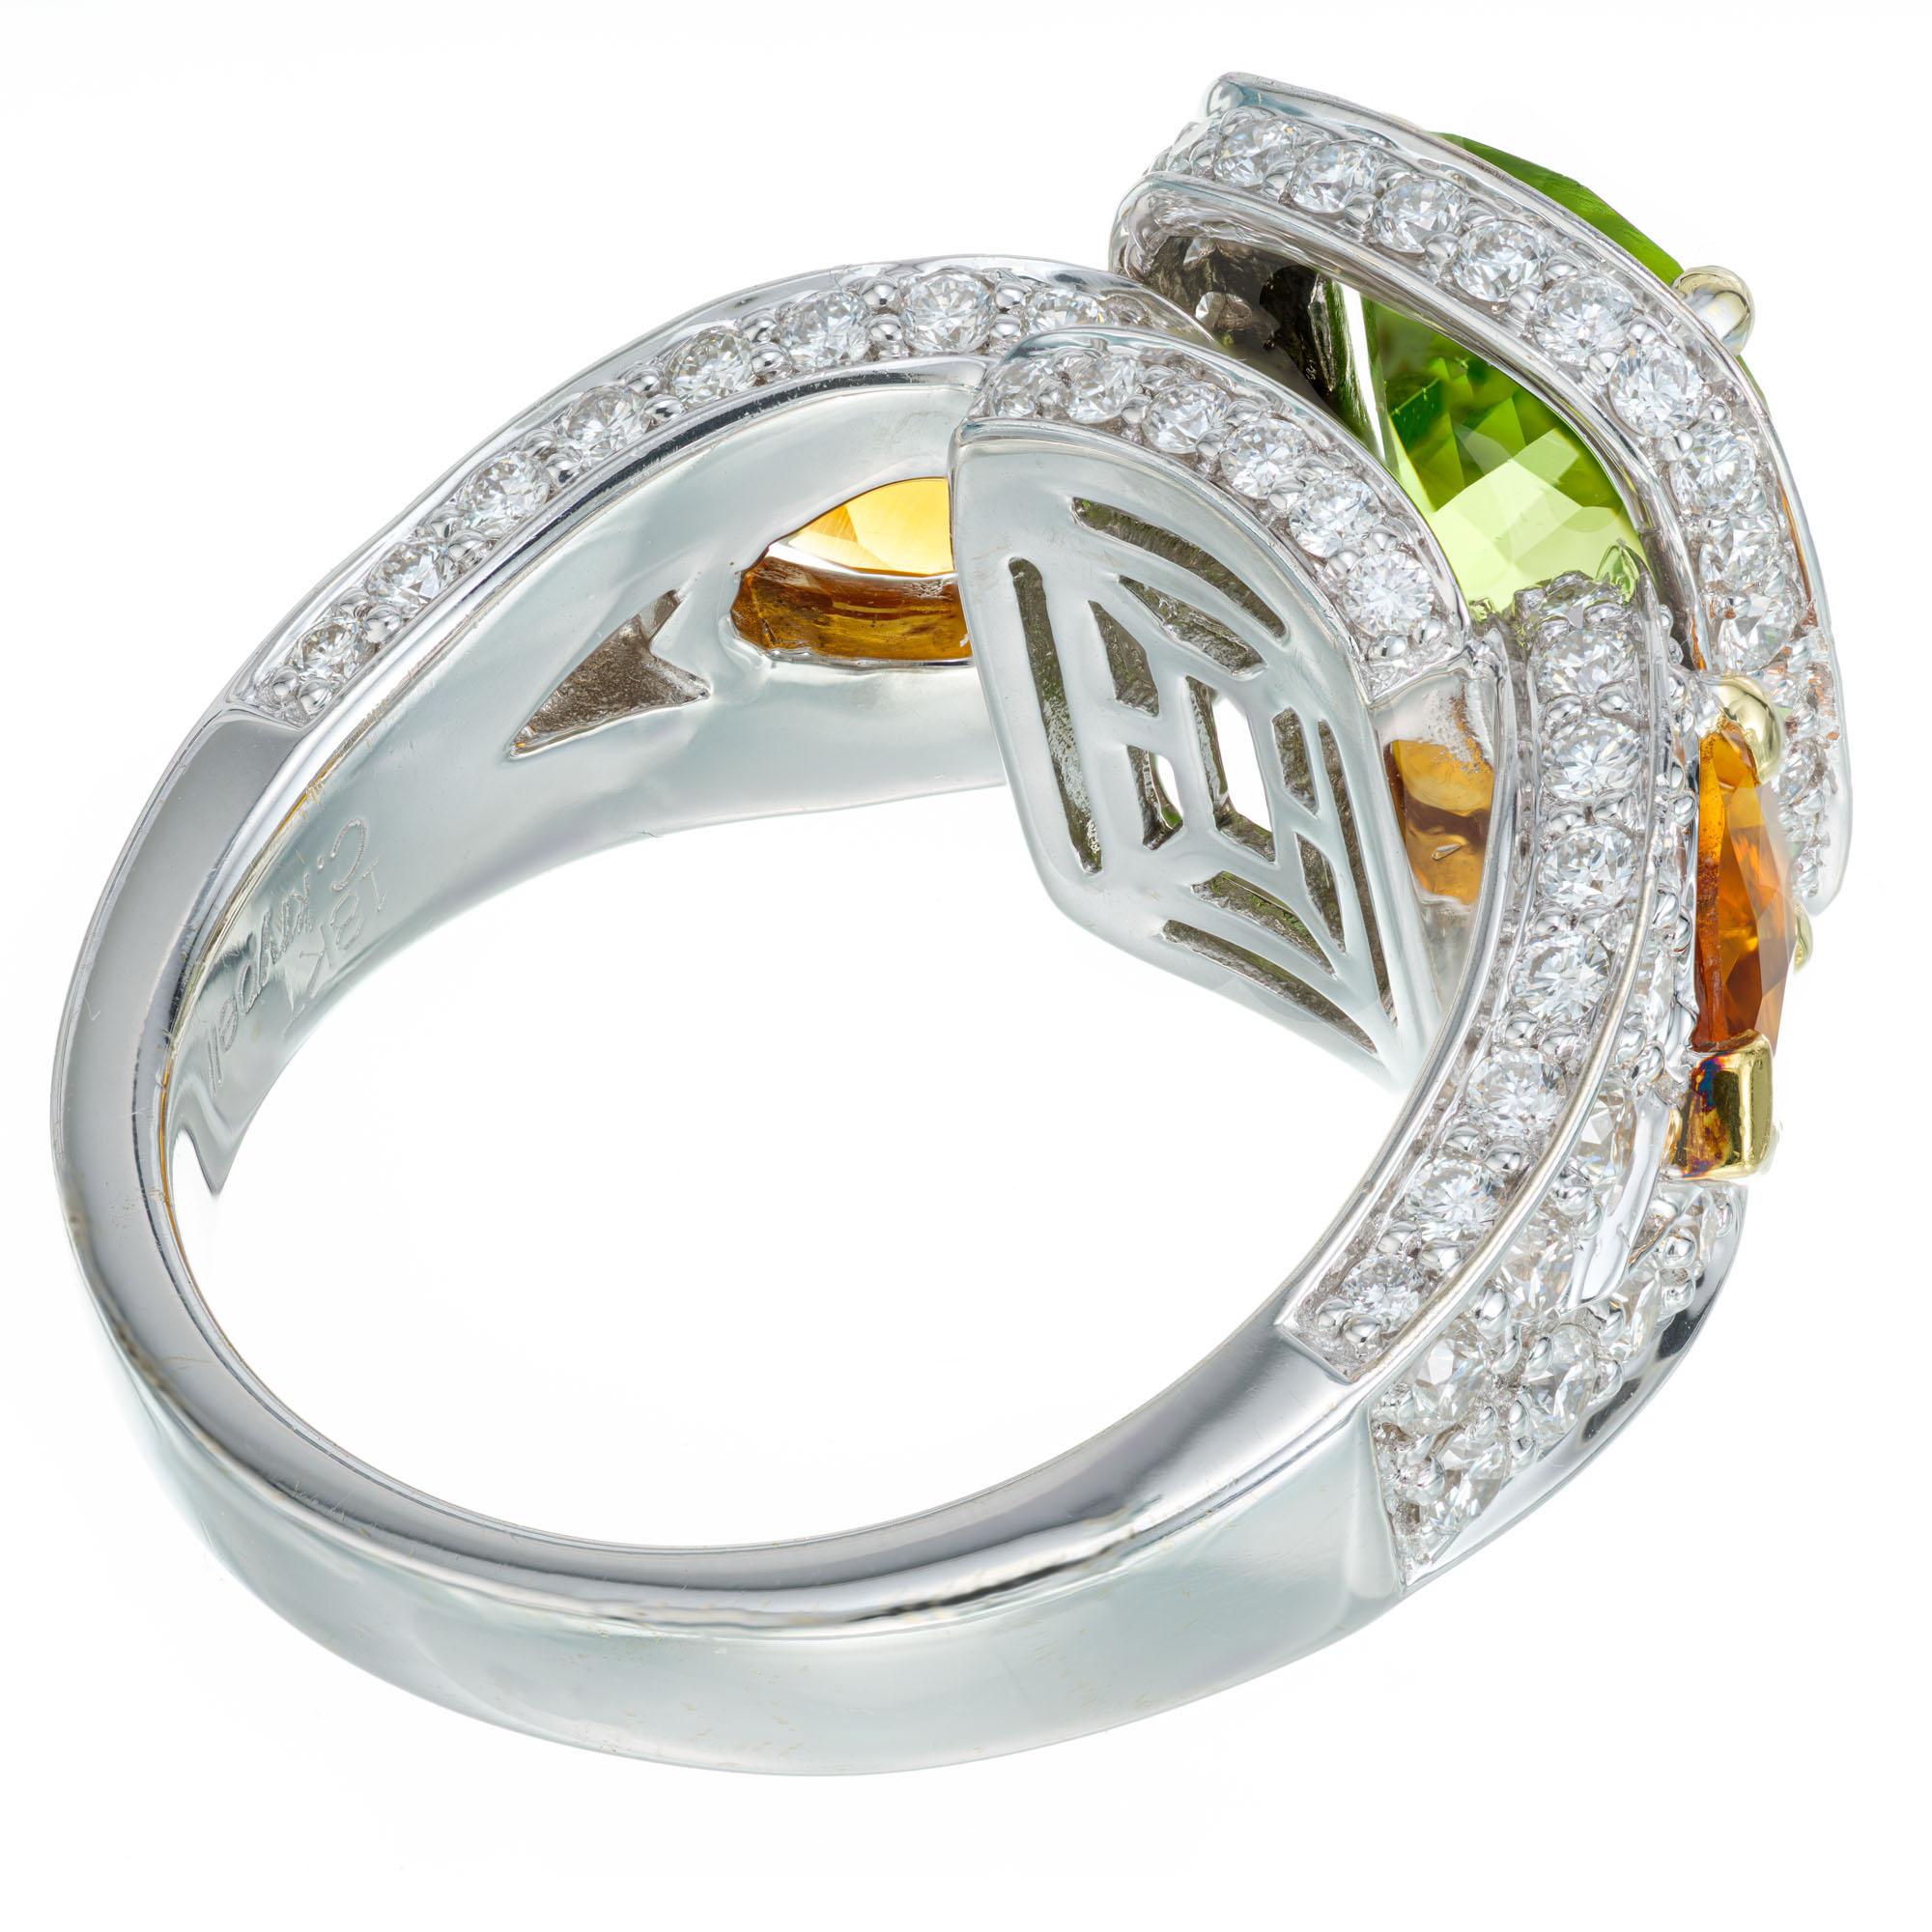 Cushion Cut Charles Krypell Peridot Citrine Diamond Gold Cocktail Ring For Sale